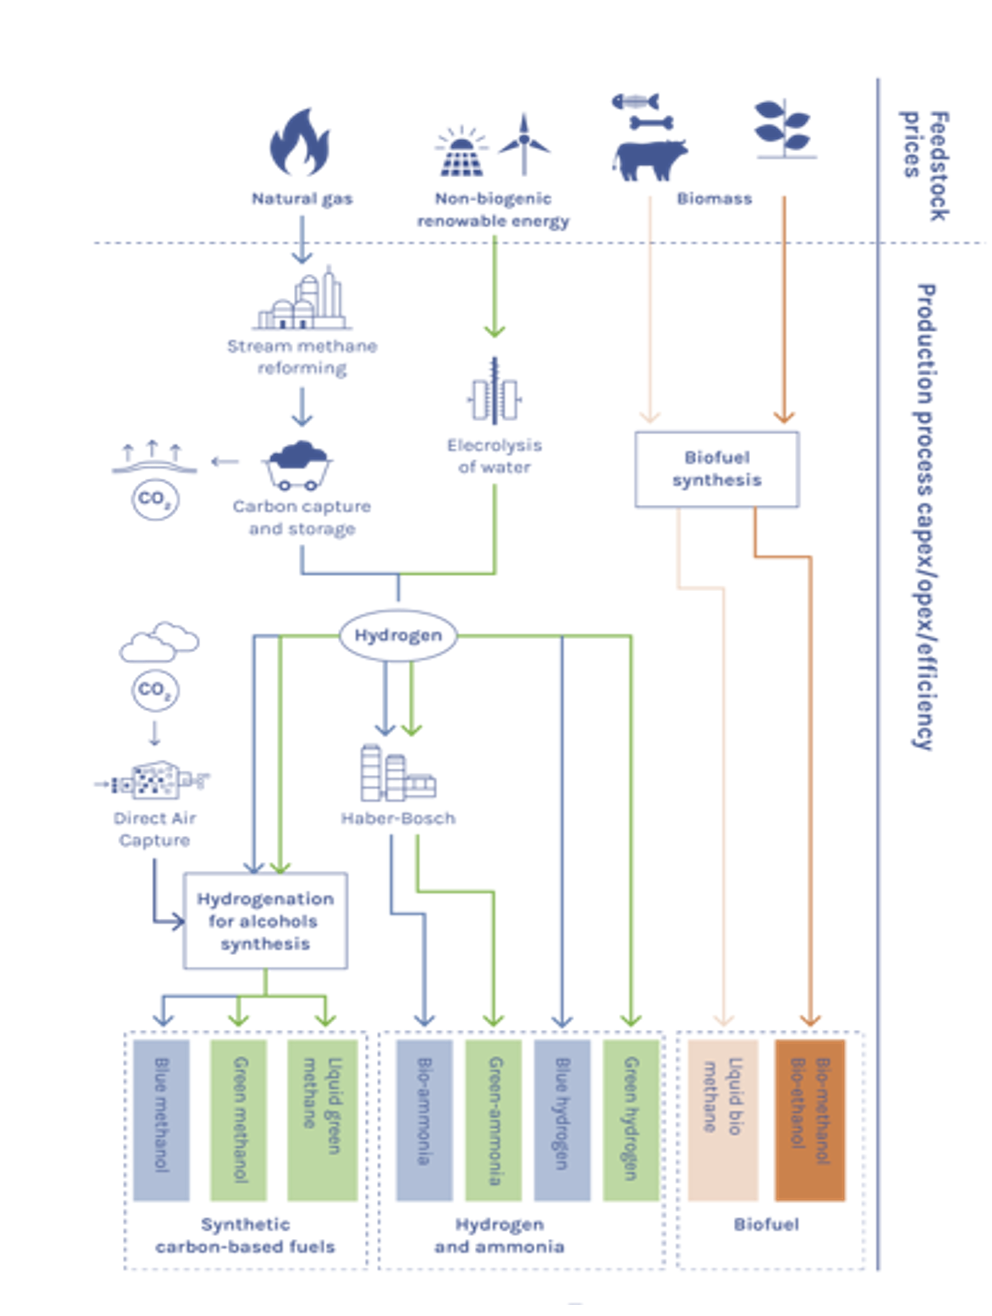 The Green Hydrogen Conundrum - Maritime Decarbonization Edition | Cleantech Group